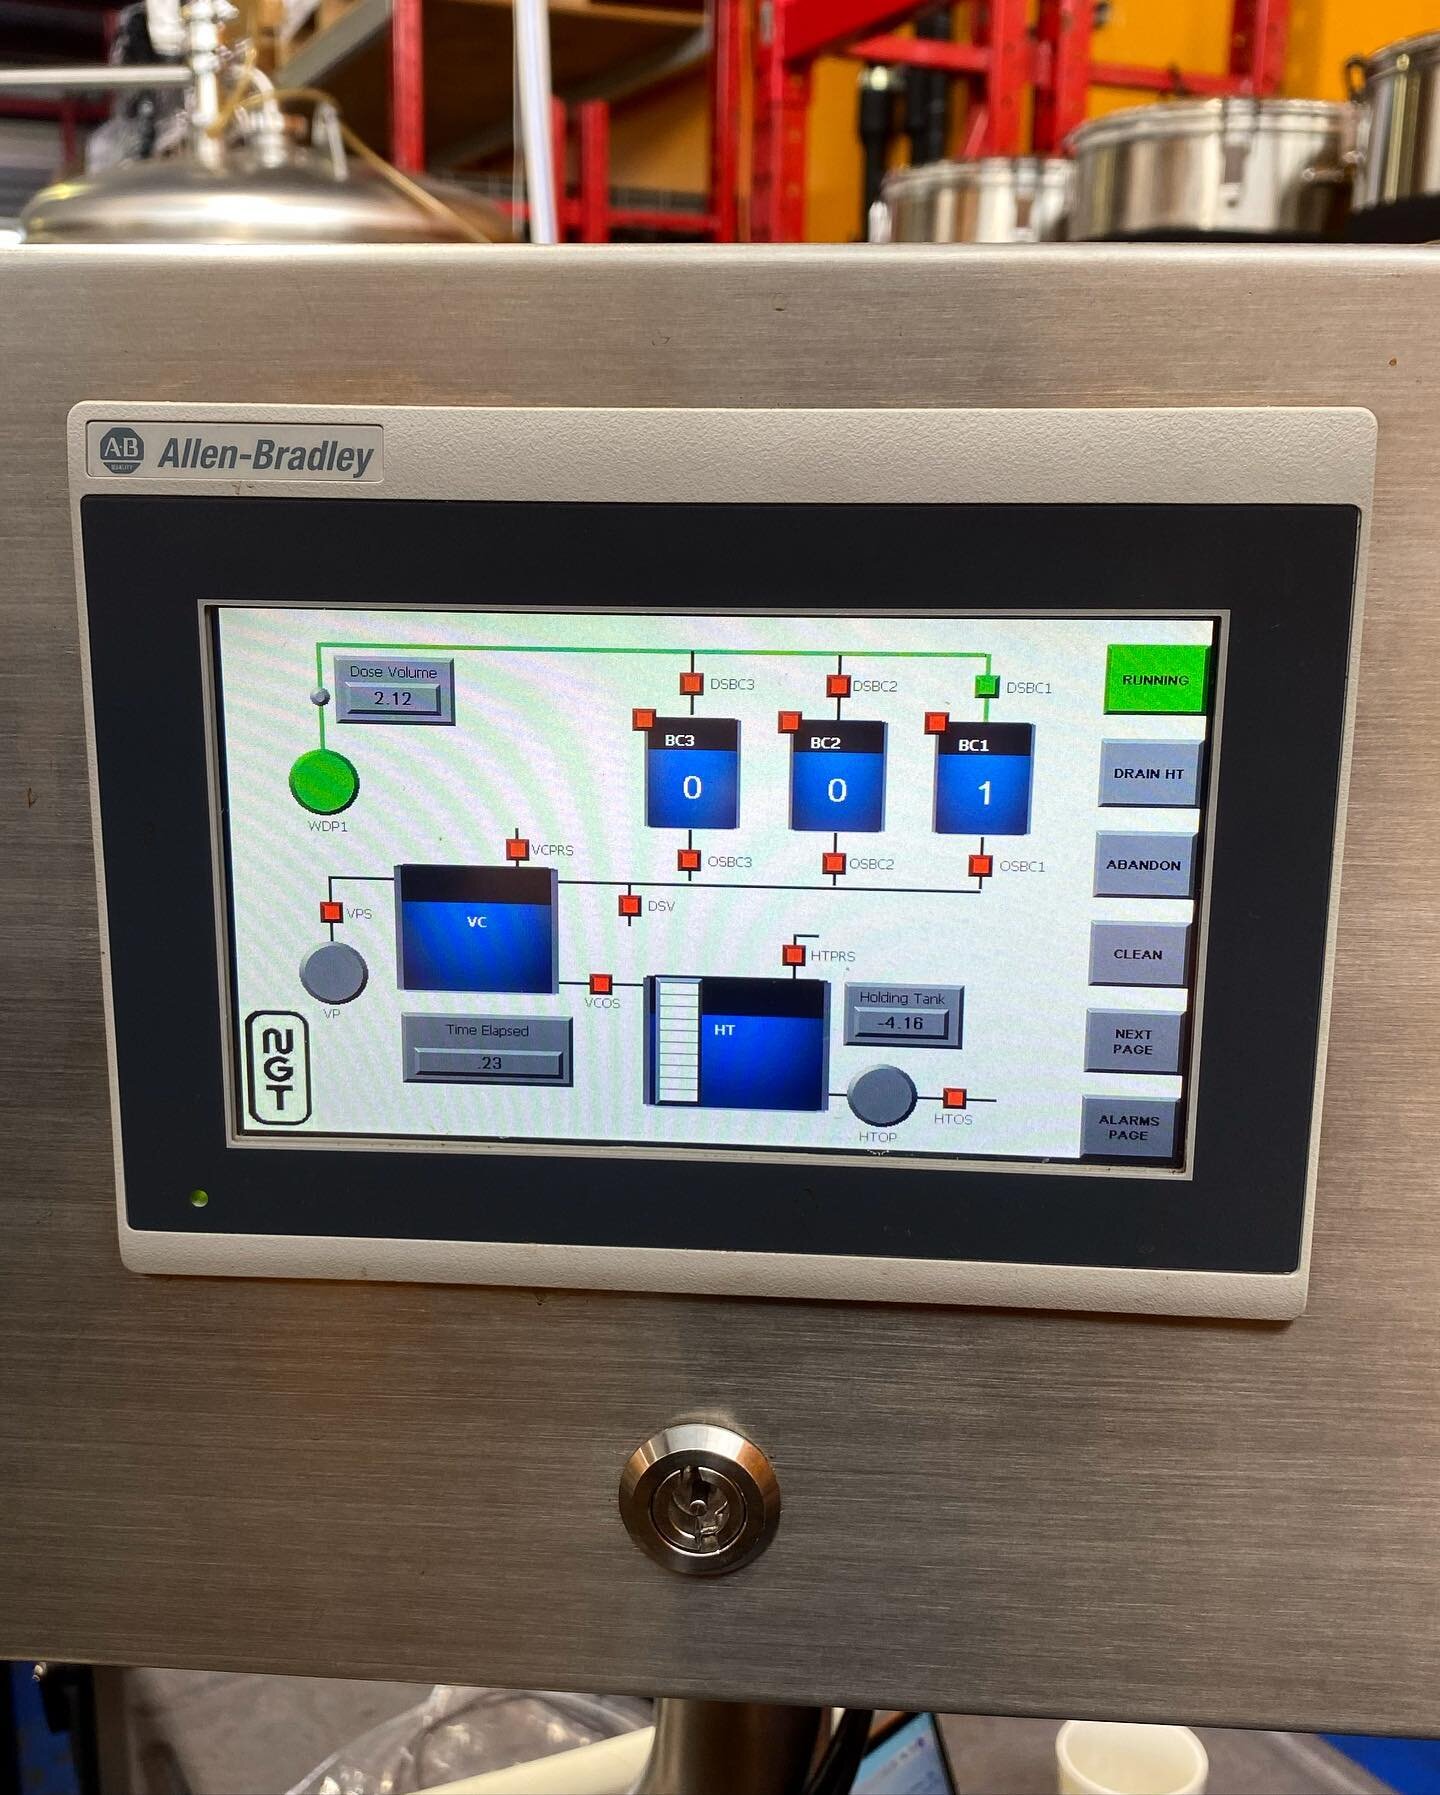 Here&rsquo;s a few snaps from one of our recent automation projects. This system runs an automated brewing production plant. We used an Allen Bradley PLC to control the system process and IFM field equipment for monitoring and control. The system inc